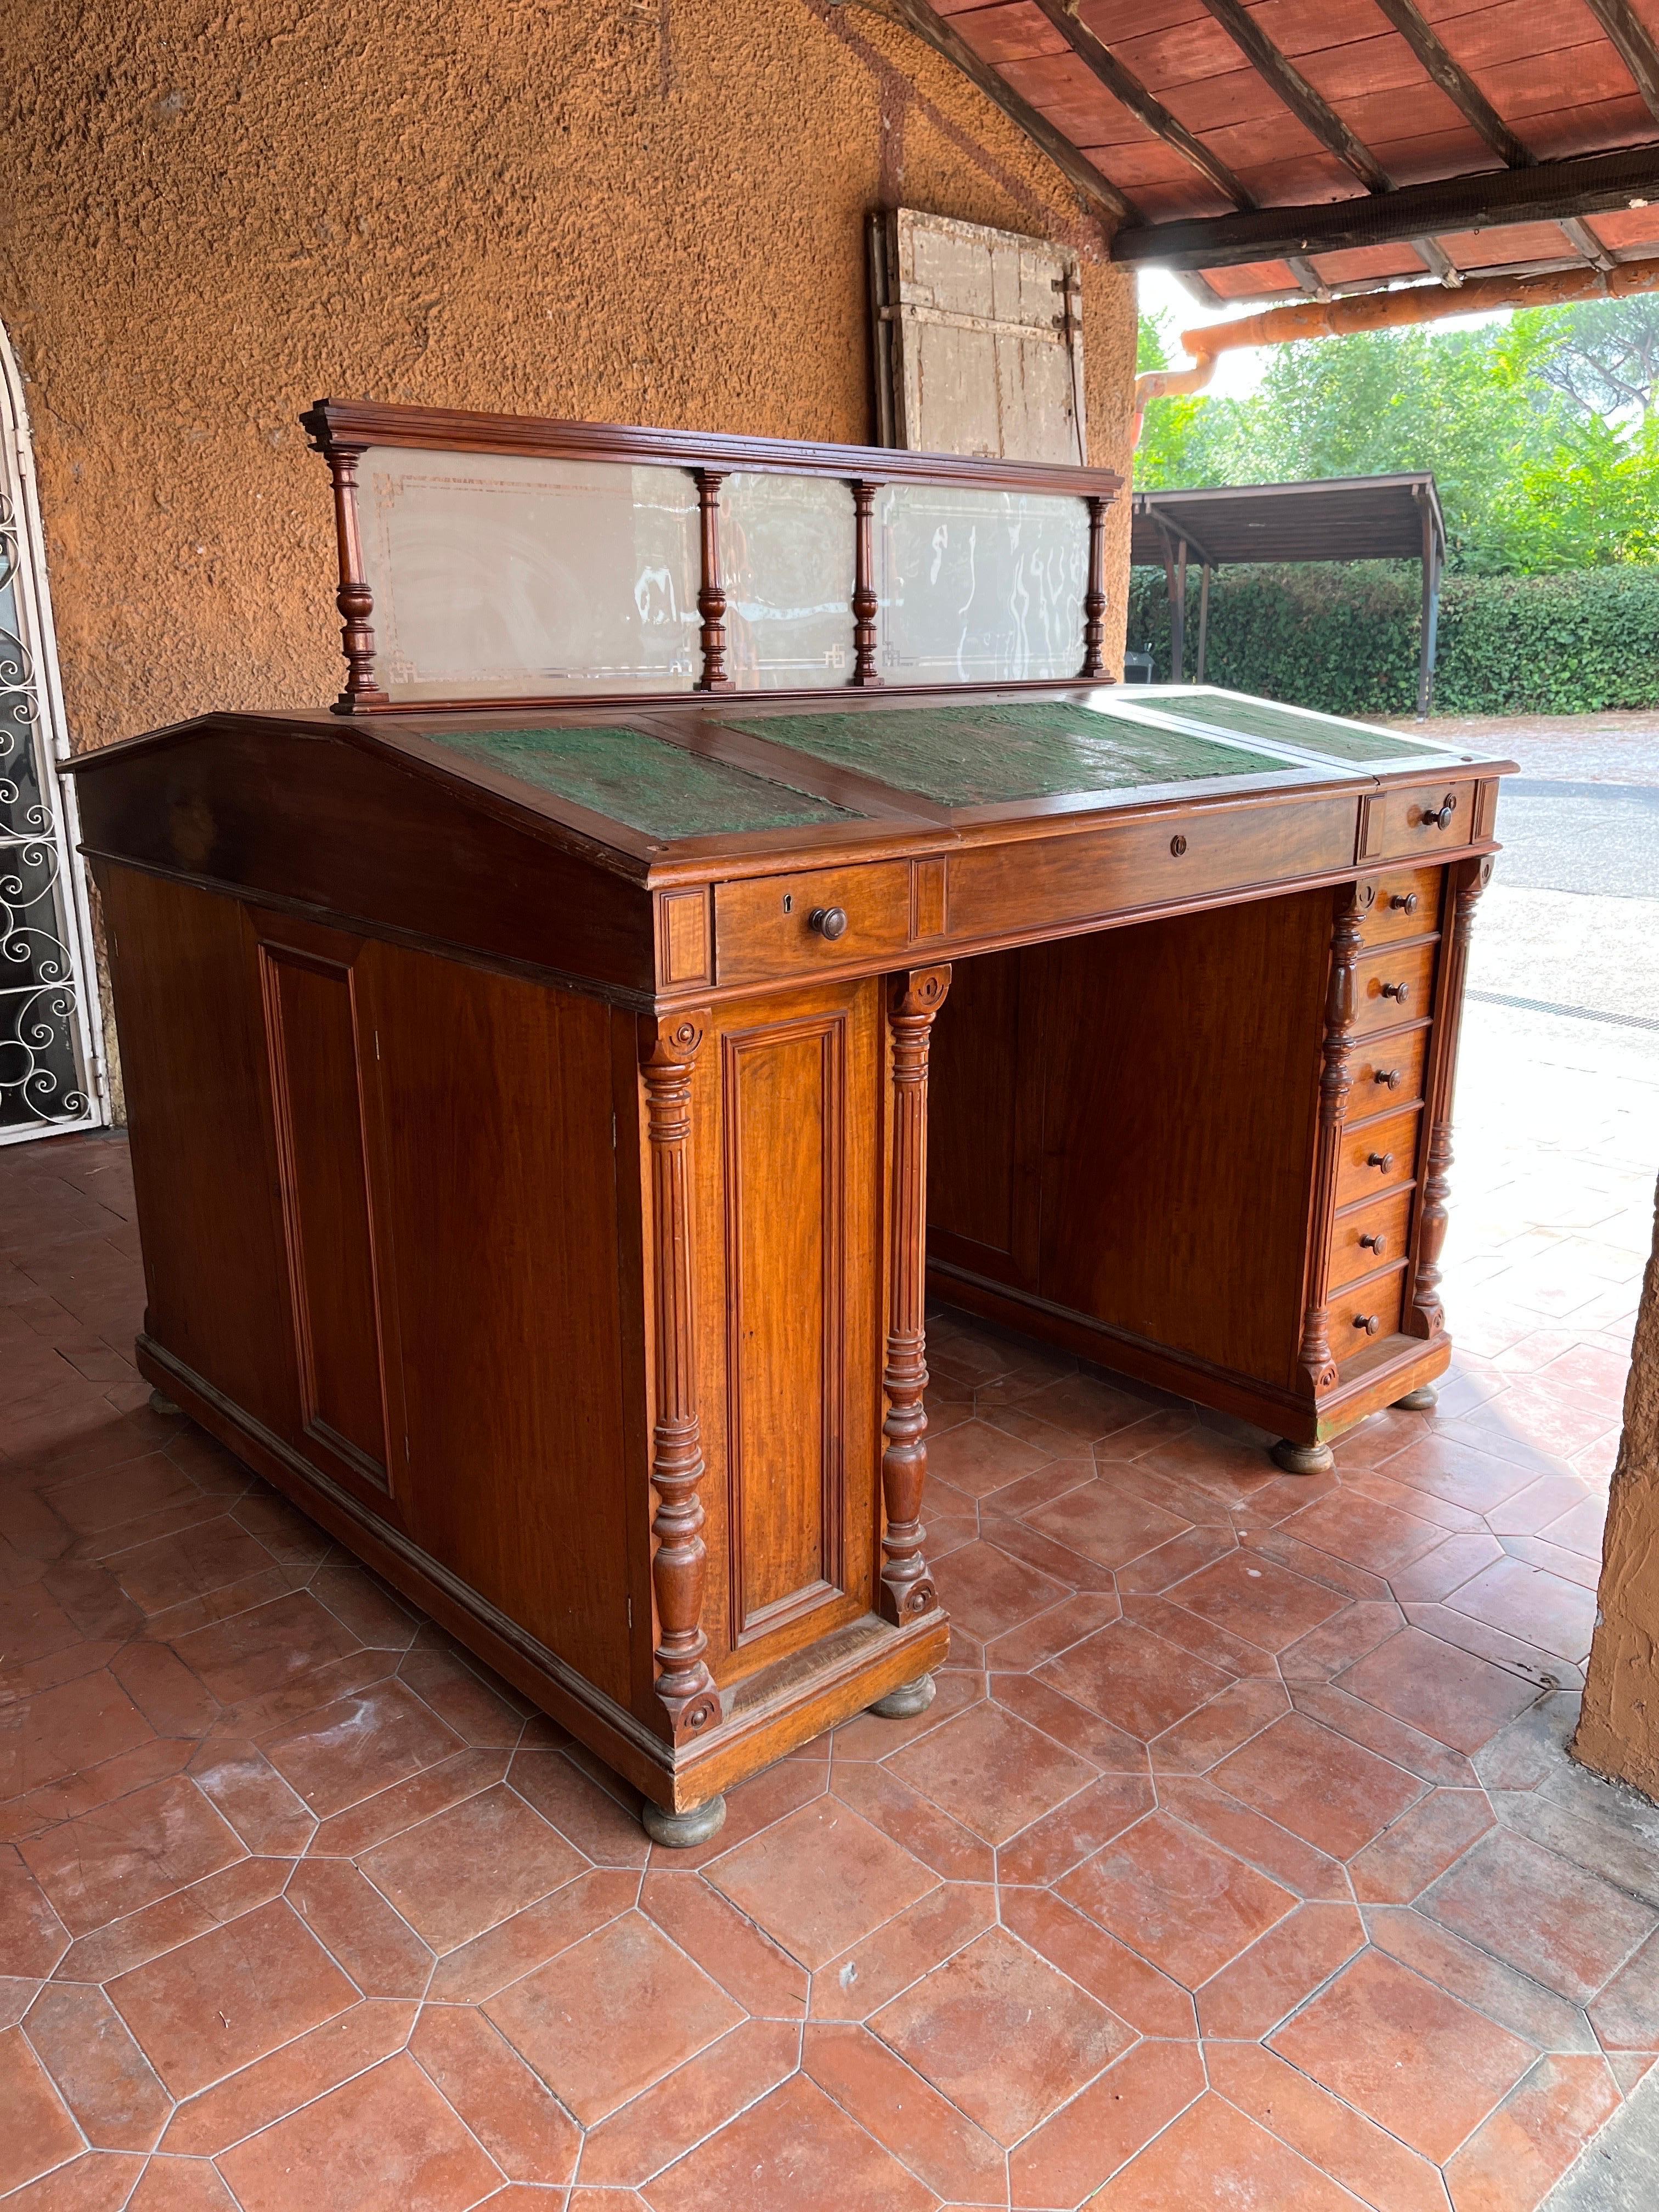 Incredible and Majestic Library desk, Biedermeier style, in good condition, in need of conservation restoration. The only thing missing is a wooden railing on the side that has been lost.The desk is made of walnut and Swedish pine frame.This is a